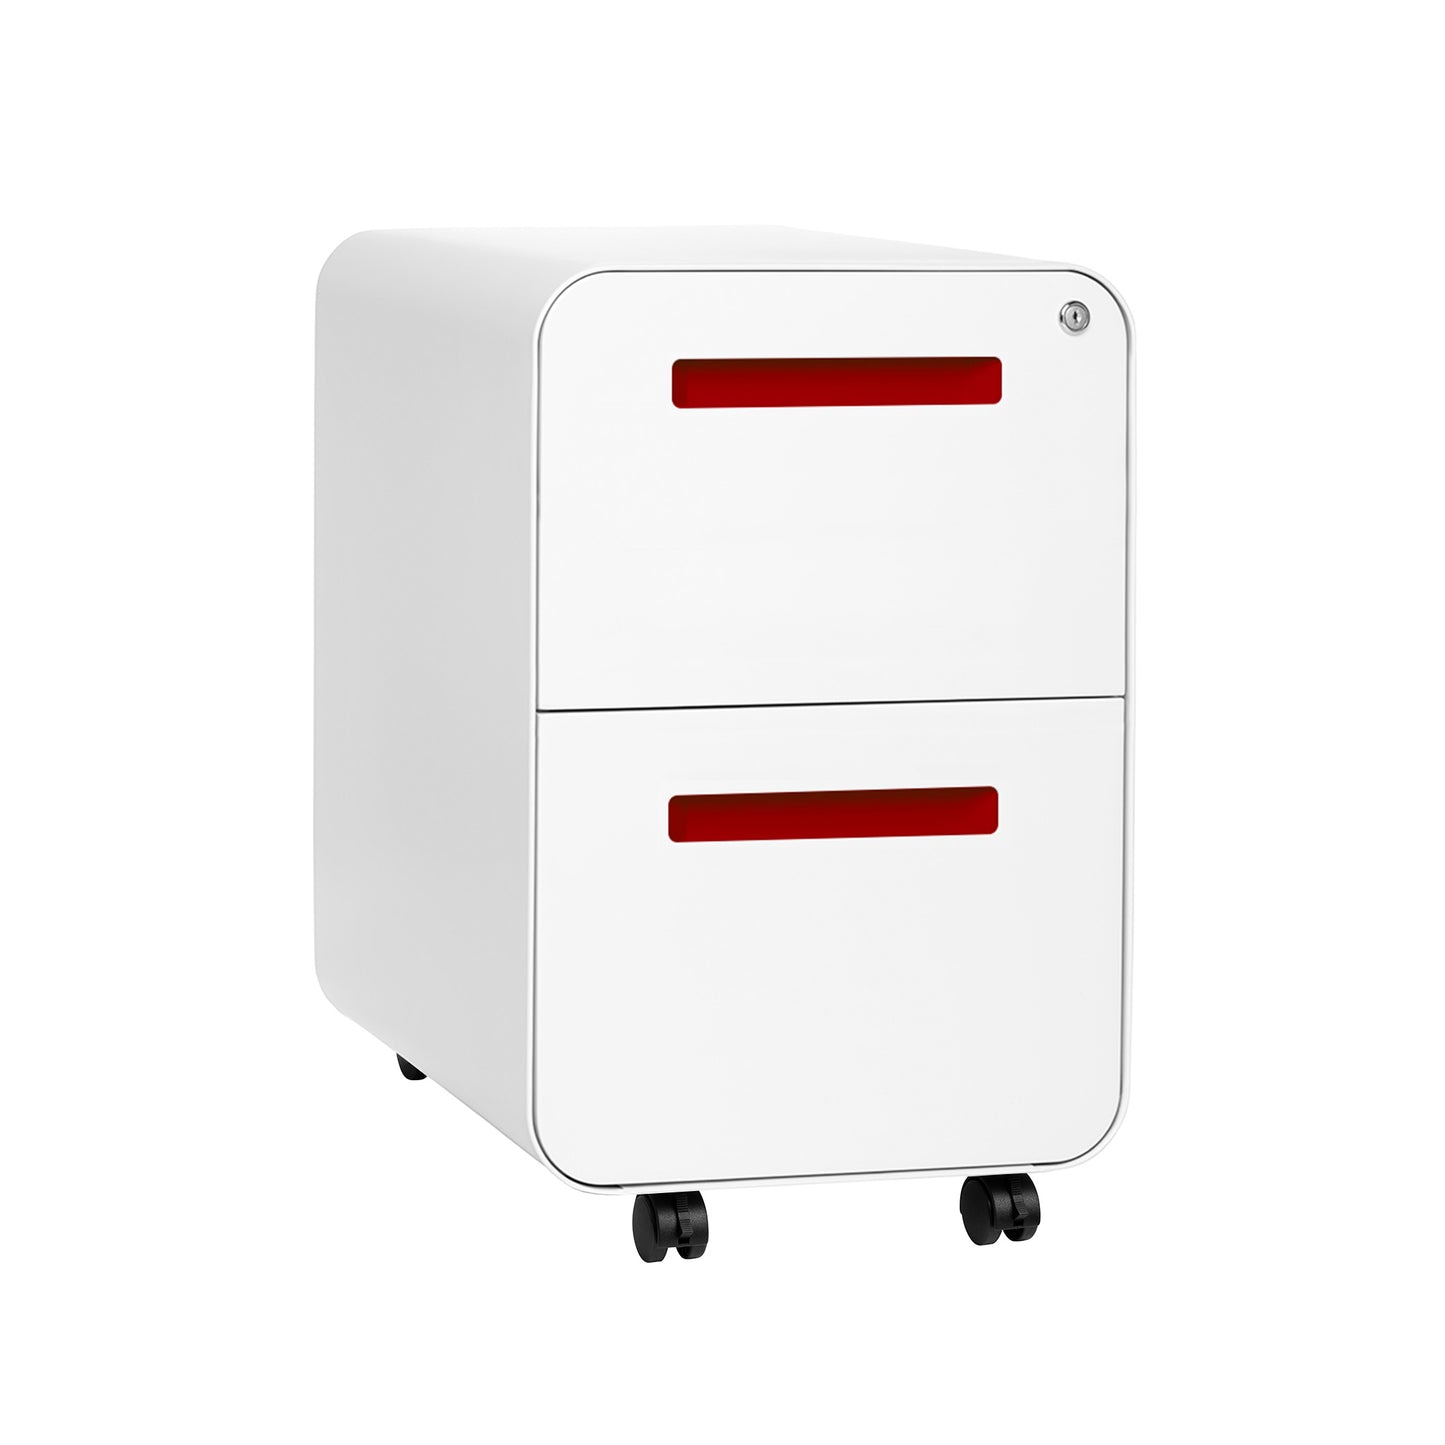 Stockpile Curve 2-Drawer File Cabinet (White/Red)